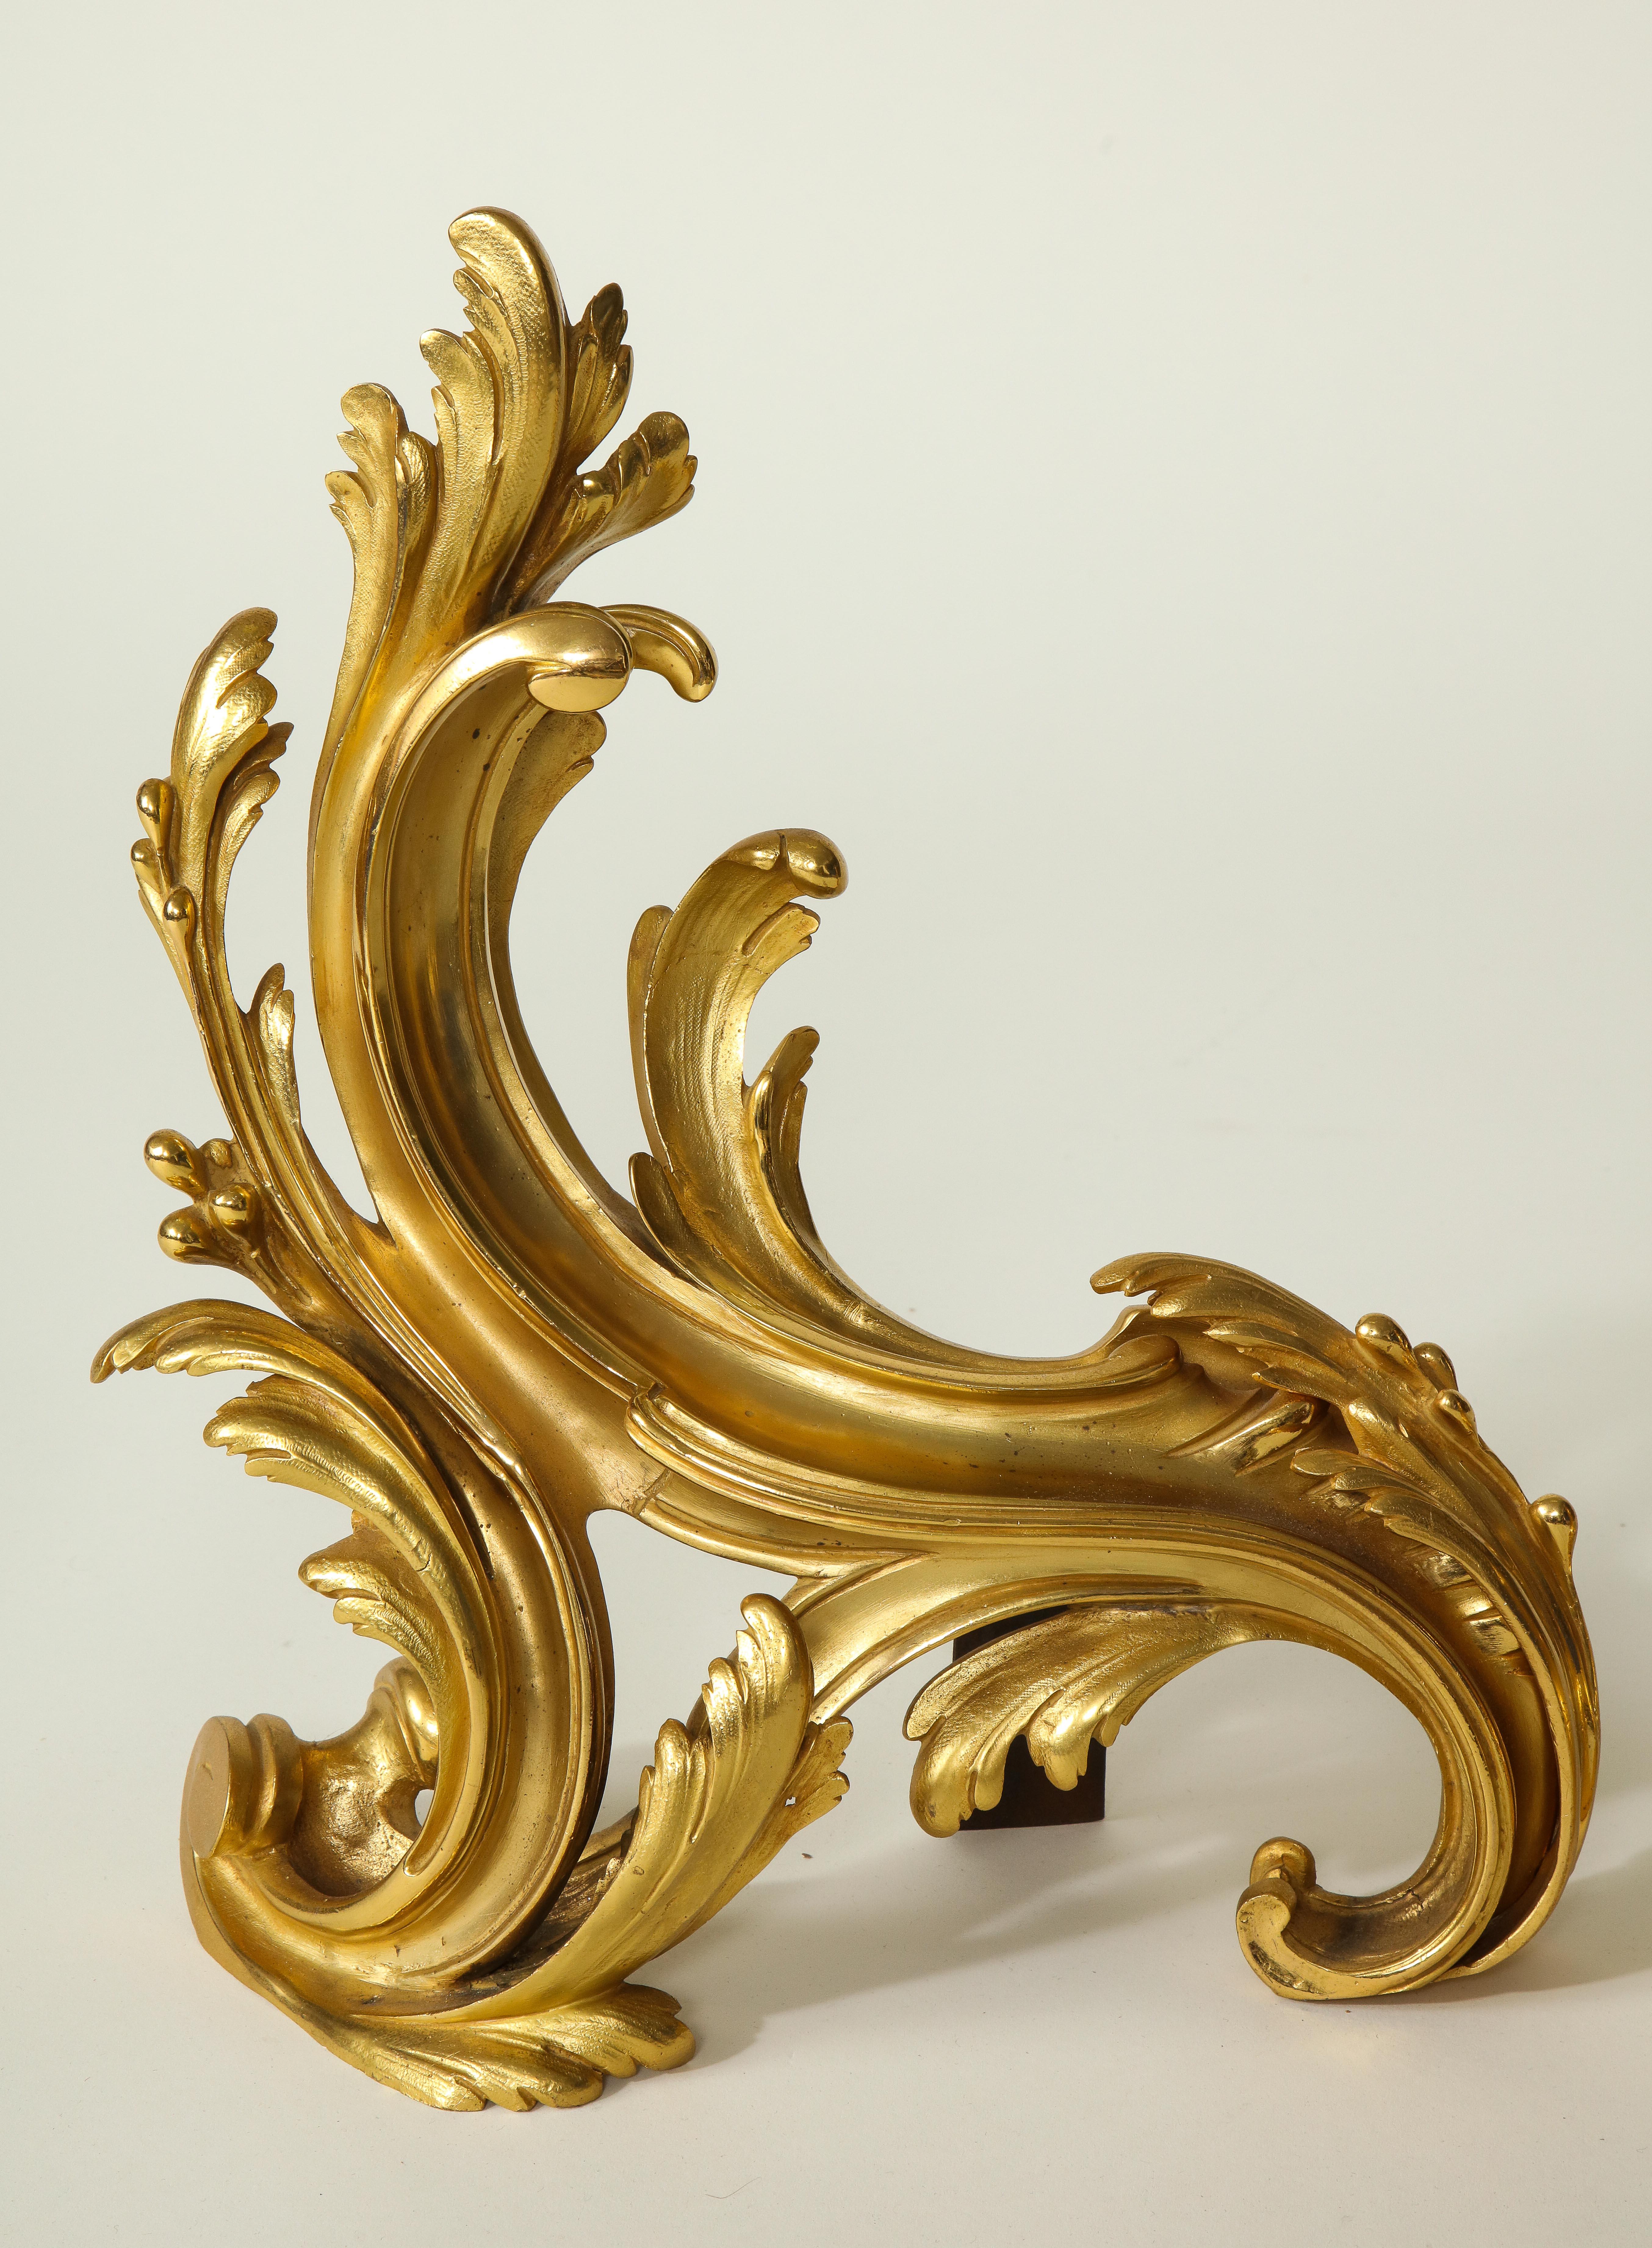 Each finely modeled in the form of acanthus leaf sprays.